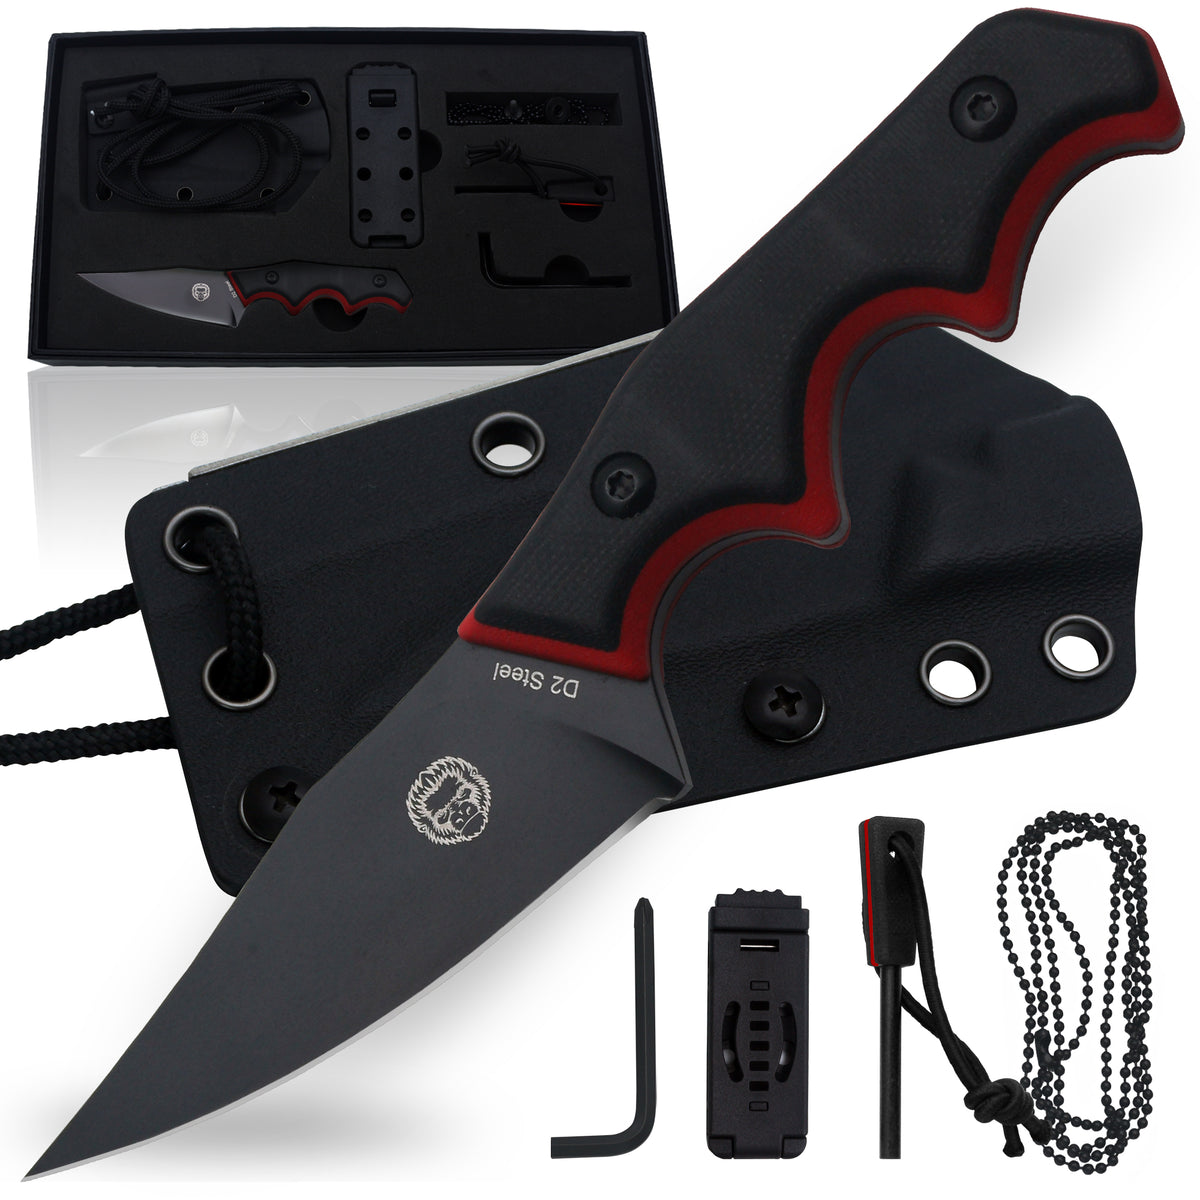 Eagles Claw Neck Knife - Finger Hole Neck Knives - Neck Knife with Sheath